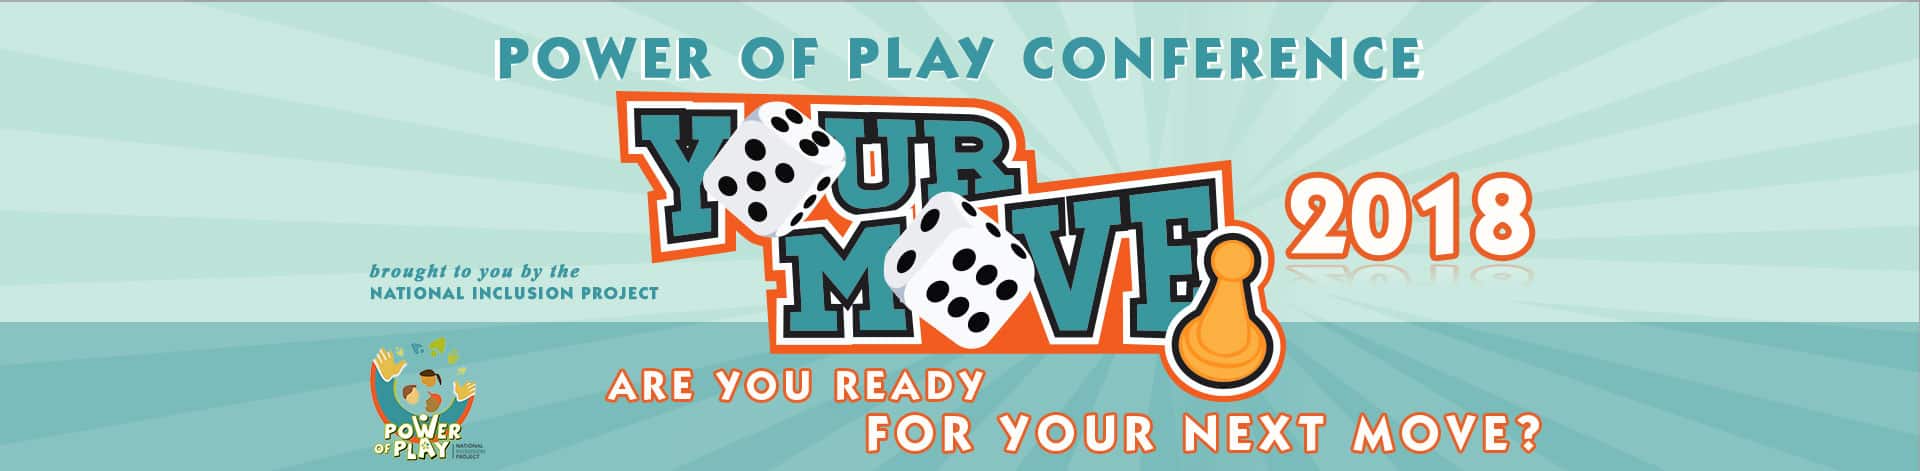 Power Of Play Conference 2018 Banner